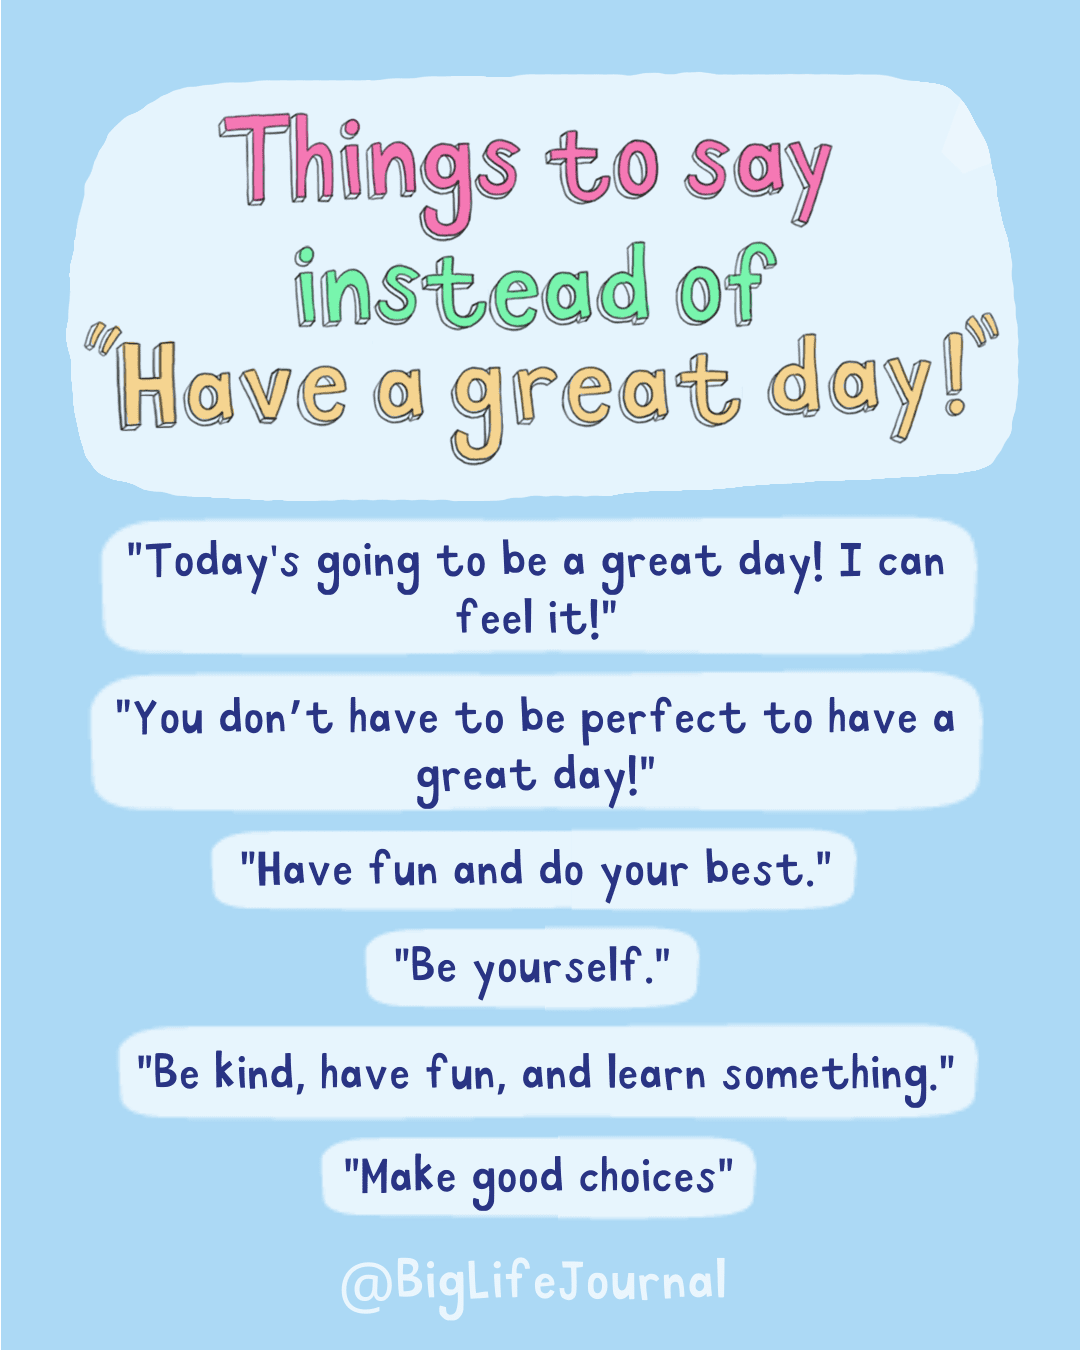 Things to say instead of "Have a great day"